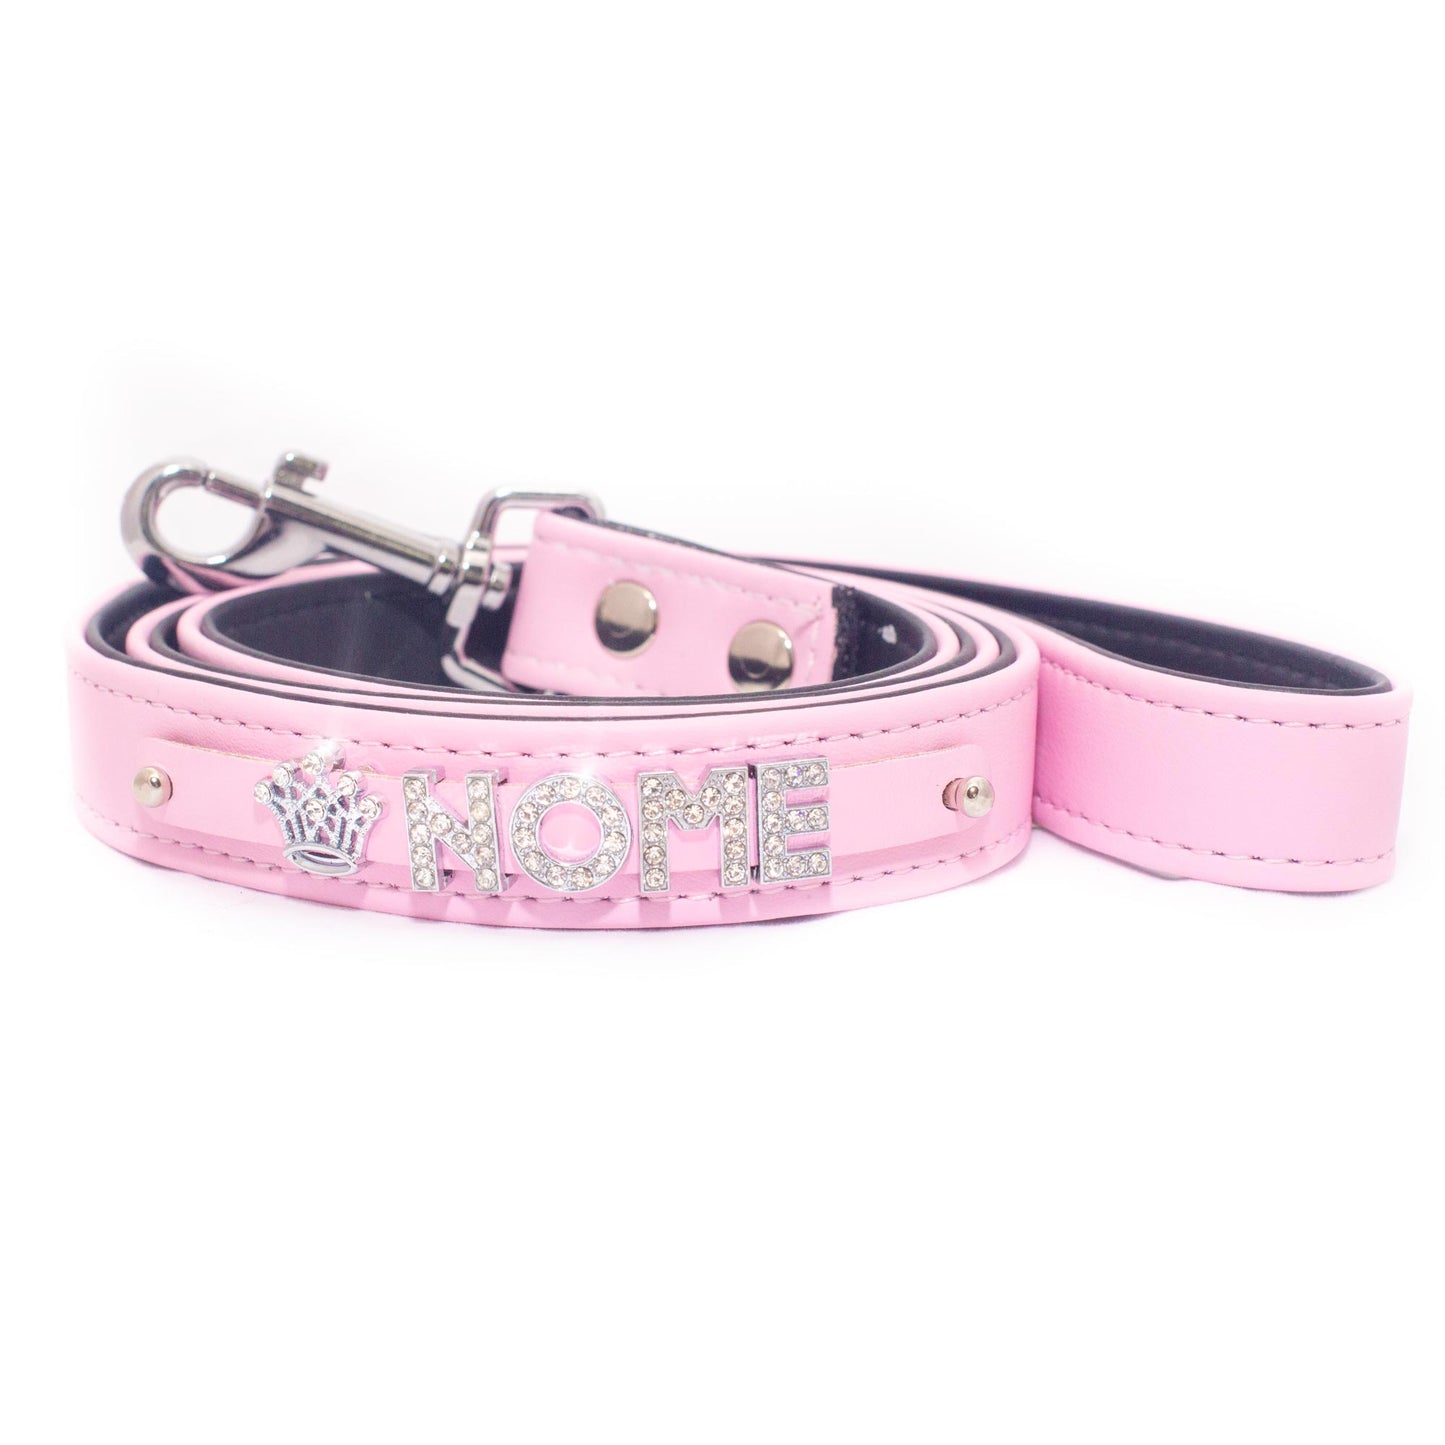 Luxury leash for dogs in eco-leather customizable with name. Made in Italy